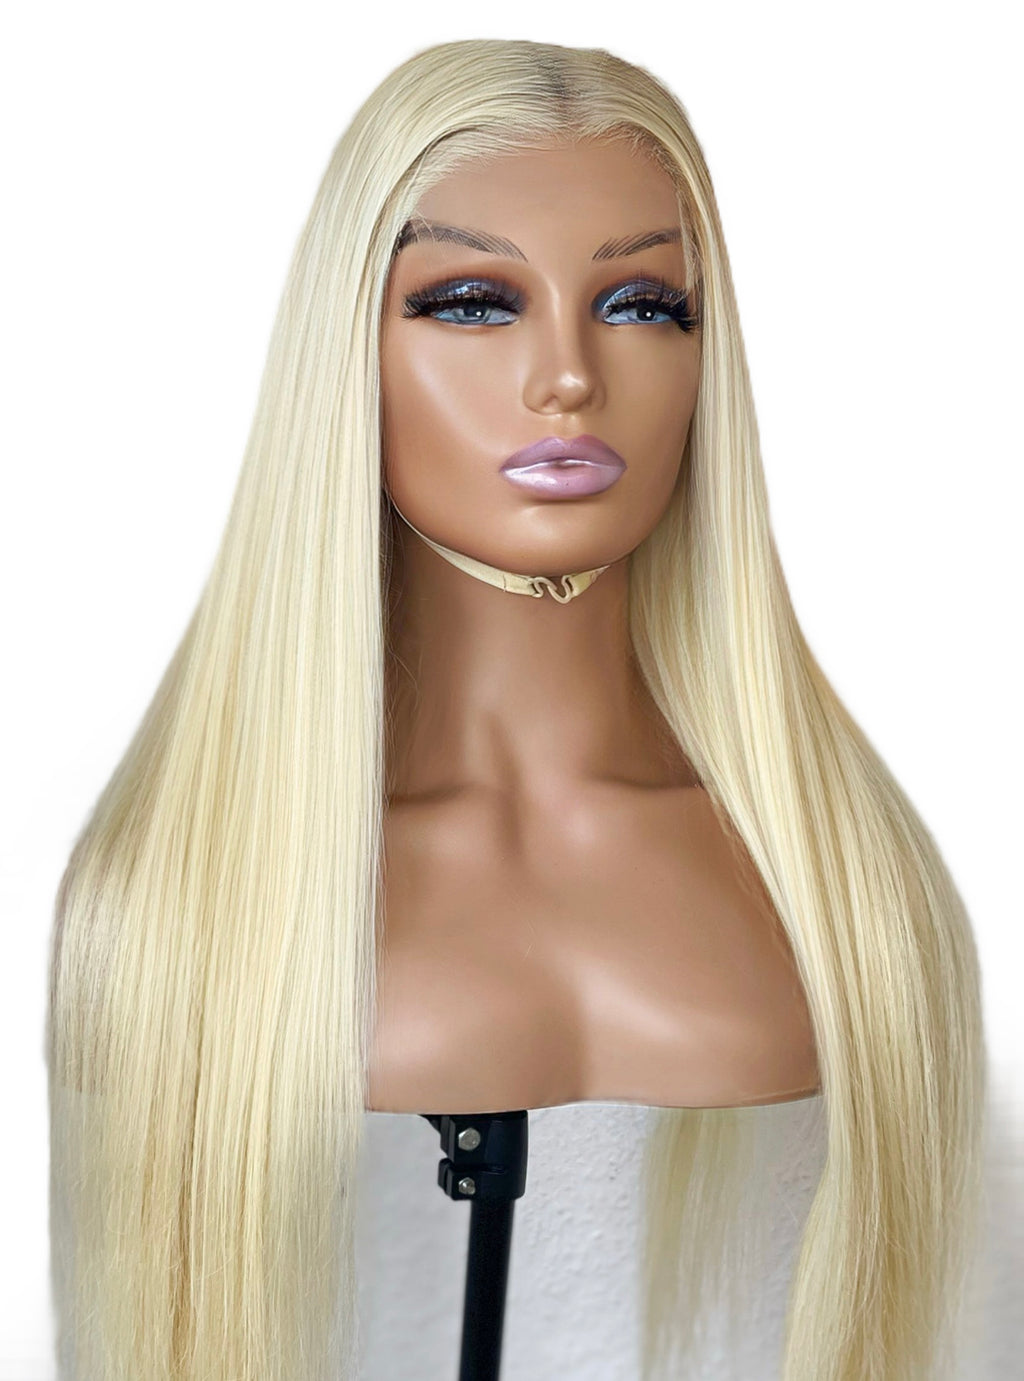 DIVA STRAIGHT BLOND HD Lace Human Hair wig,front page close up